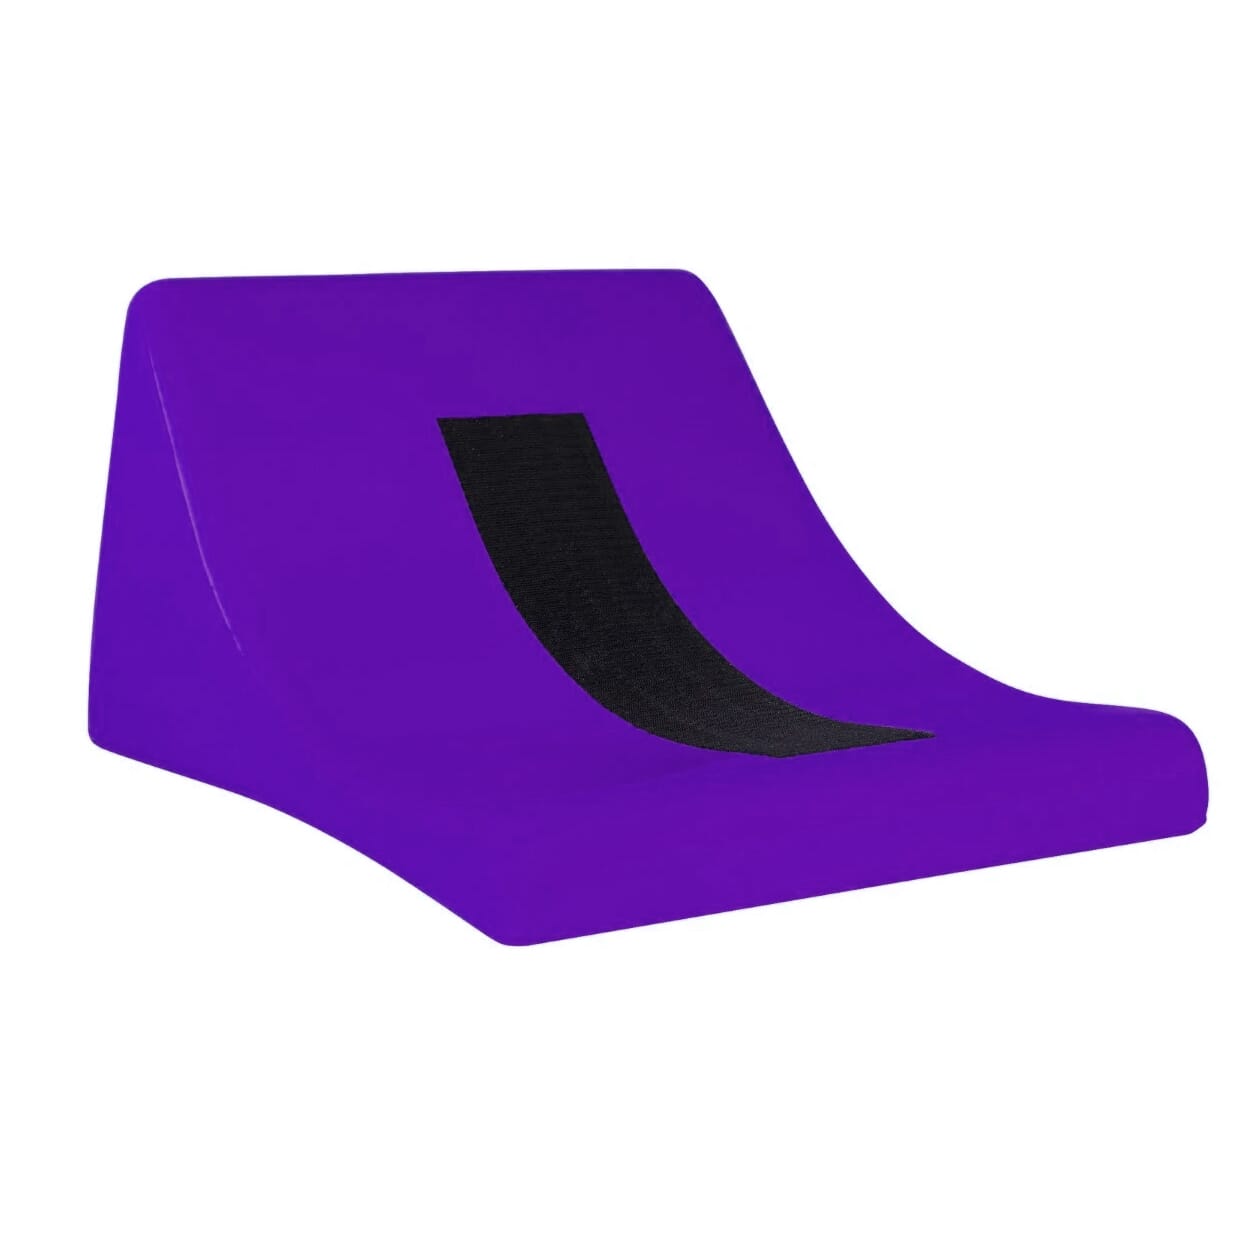 View Tumble Forms Floor Sitter Wedge Purple SML information